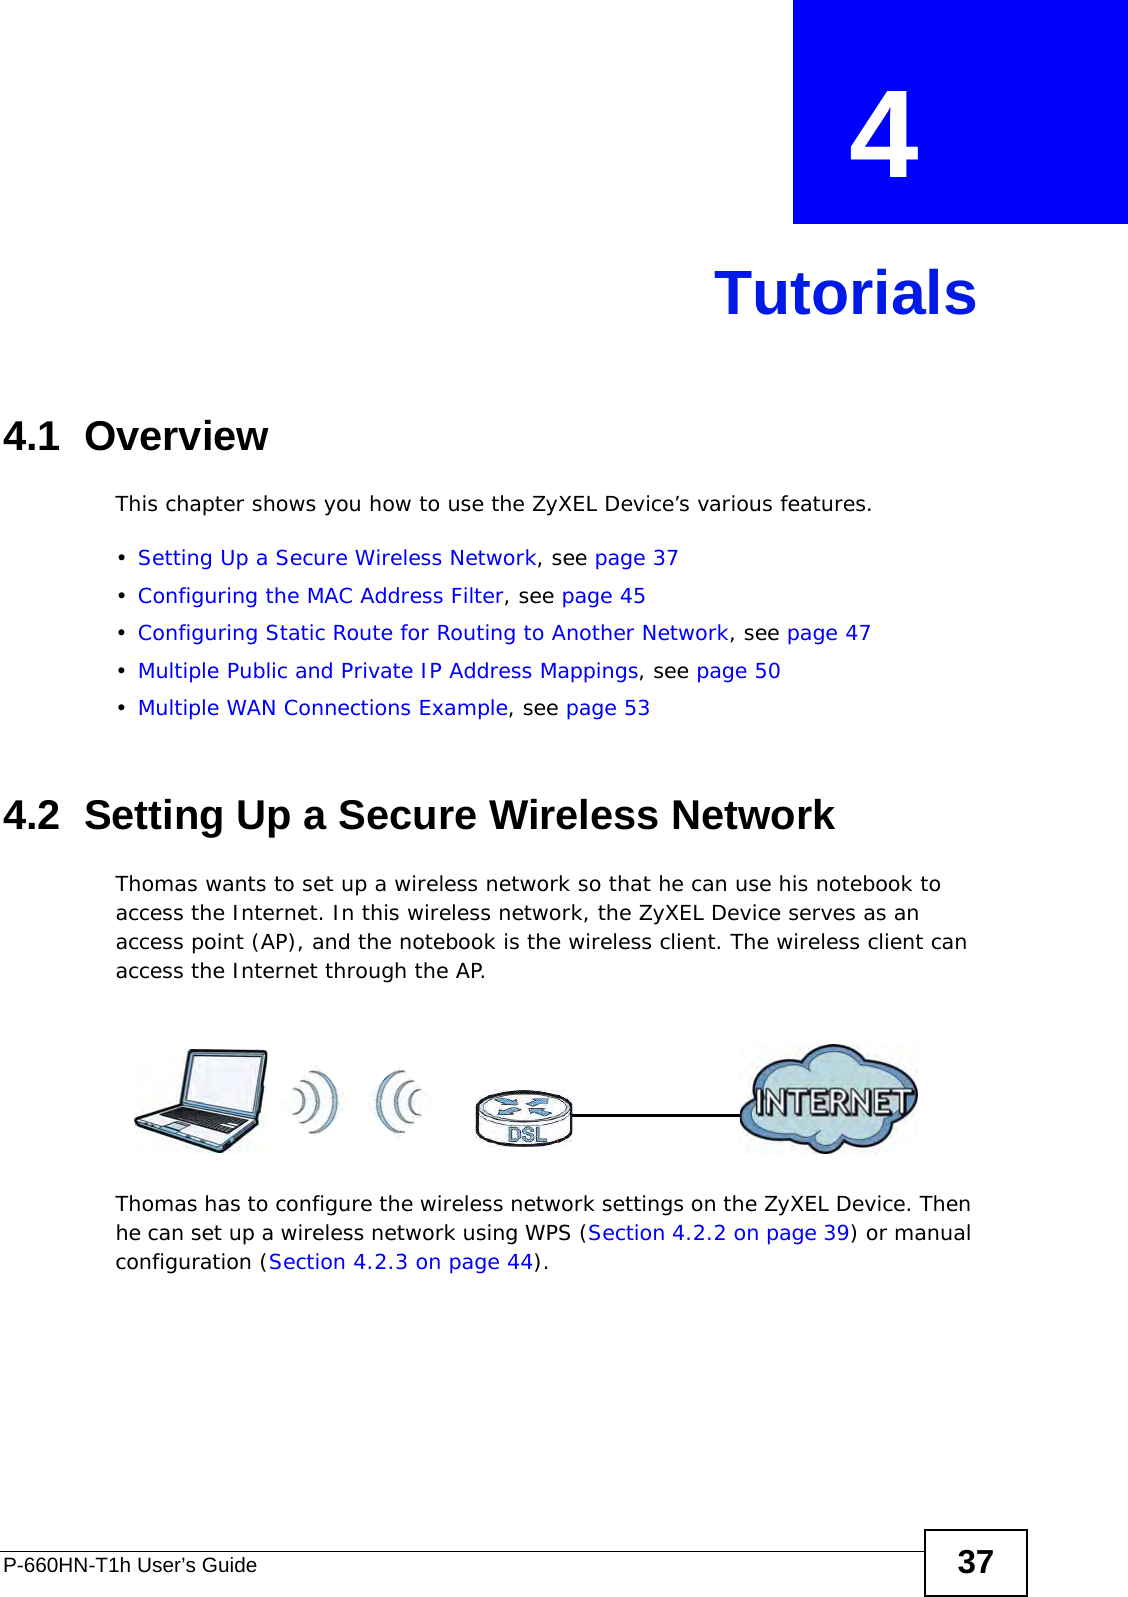 P-660HN-T1h User’s Guide 37CHAPTER  4 Tutorials4.1  OverviewThis chapter shows you how to use the ZyXEL Device’s various features.•Setting Up a Secure Wireless Network, see page 37•Configuring the MAC Address Filter, see page 45•Configuring Static Route for Routing to Another Network, see page 47•Multiple Public and Private IP Address Mappings, see page 50•Multiple WAN Connections Example, see page 534.2  Setting Up a Secure Wireless NetworkThomas wants to set up a wireless network so that he can use his notebook to access the Internet. In this wireless network, the ZyXEL Device serves as an access point (AP), and the notebook is the wireless client. The wireless client can access the Internet through the AP.Thomas has to configure the wireless network settings on the ZyXEL Device. Then he can set up a wireless network using WPS (Section 4.2.2 on page 39) or manual configuration (Section 4.2.3 on page 44).